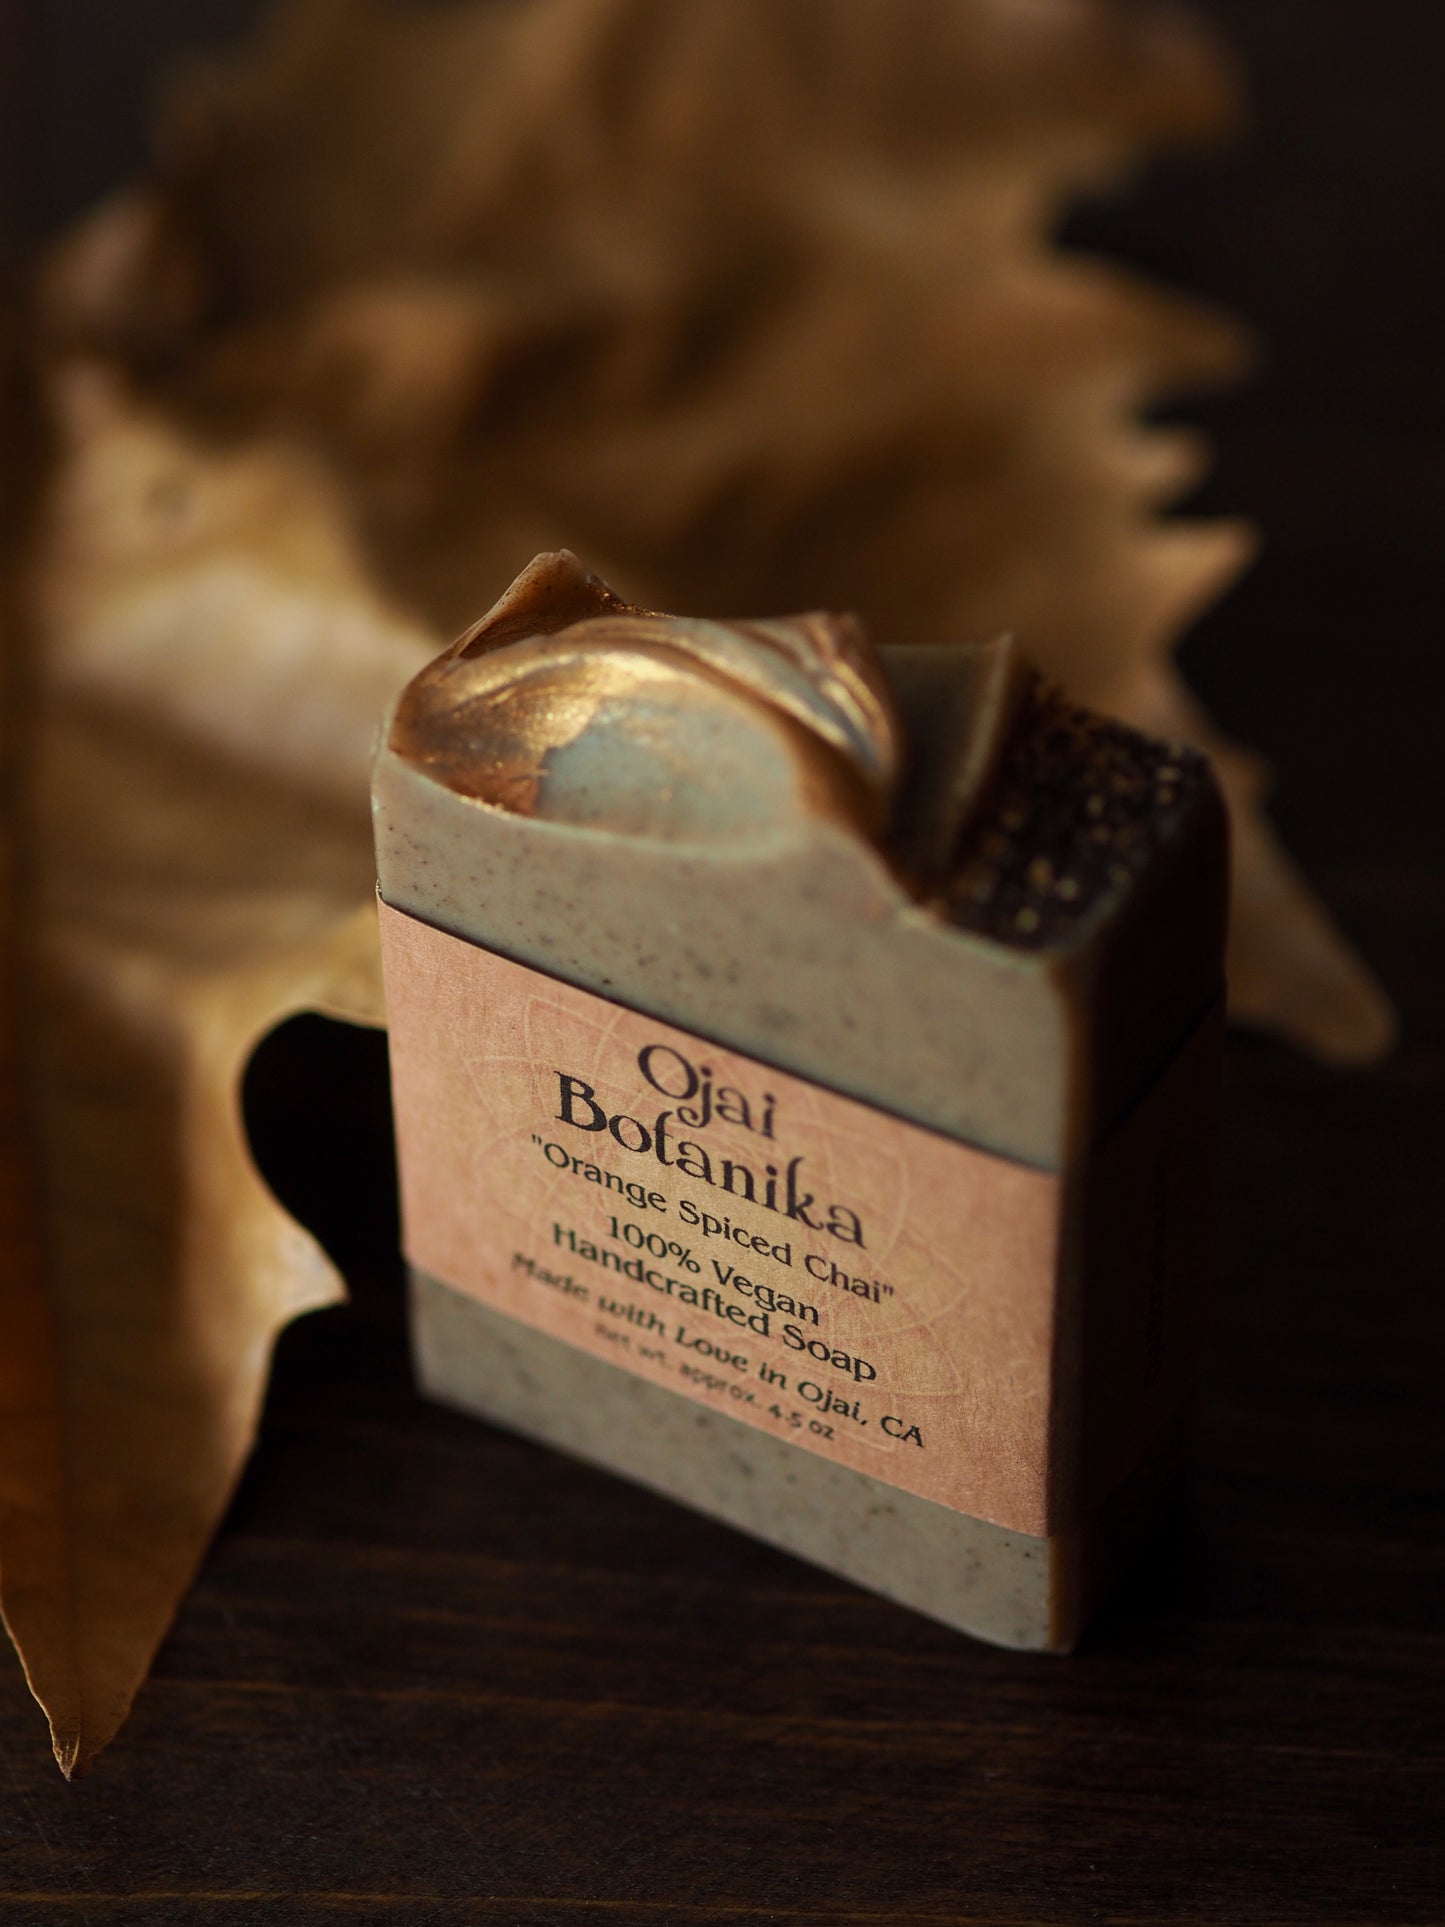 Orange Spiced Chai - Artisan Natural Soap - Limited Edition